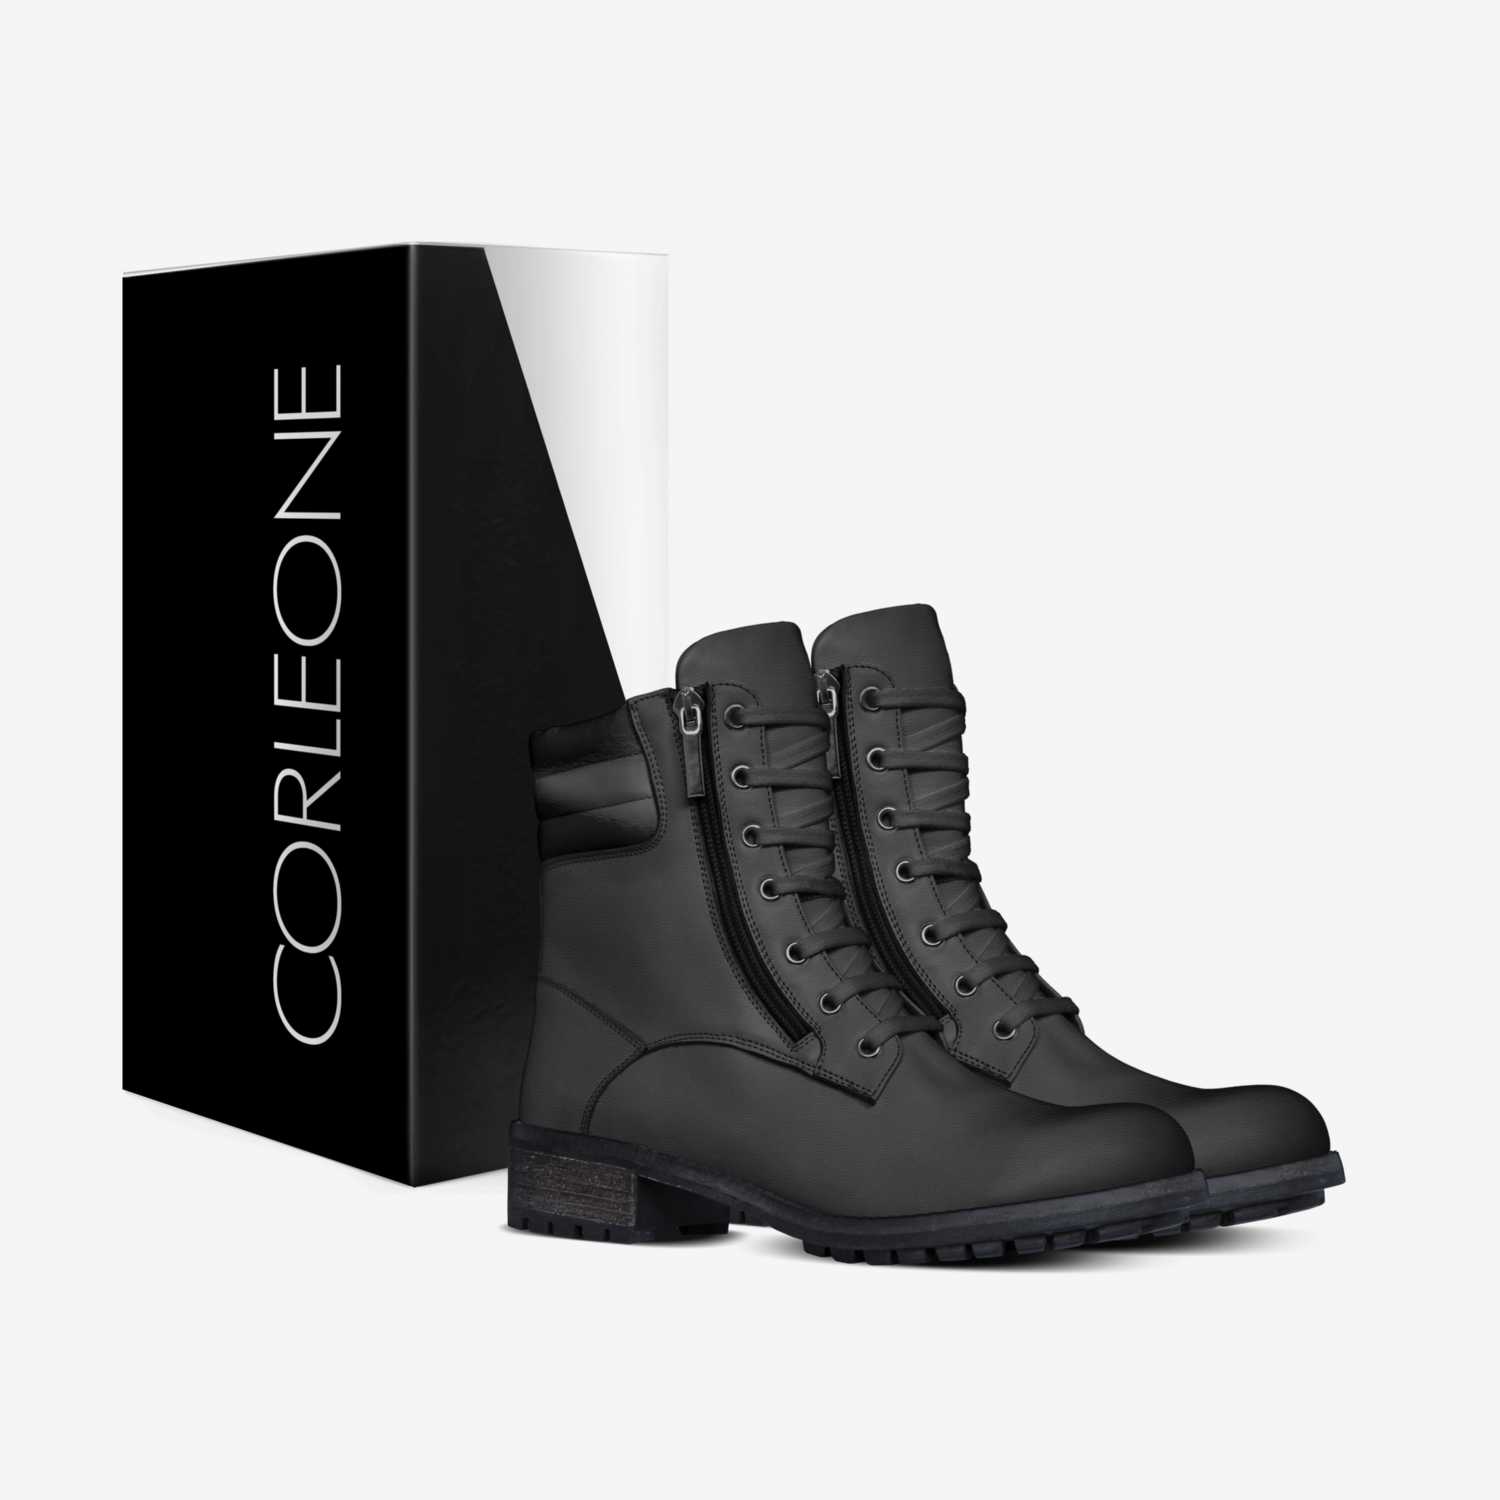 Corleone custom made in Italy shoes by Francisco Morales | Box view